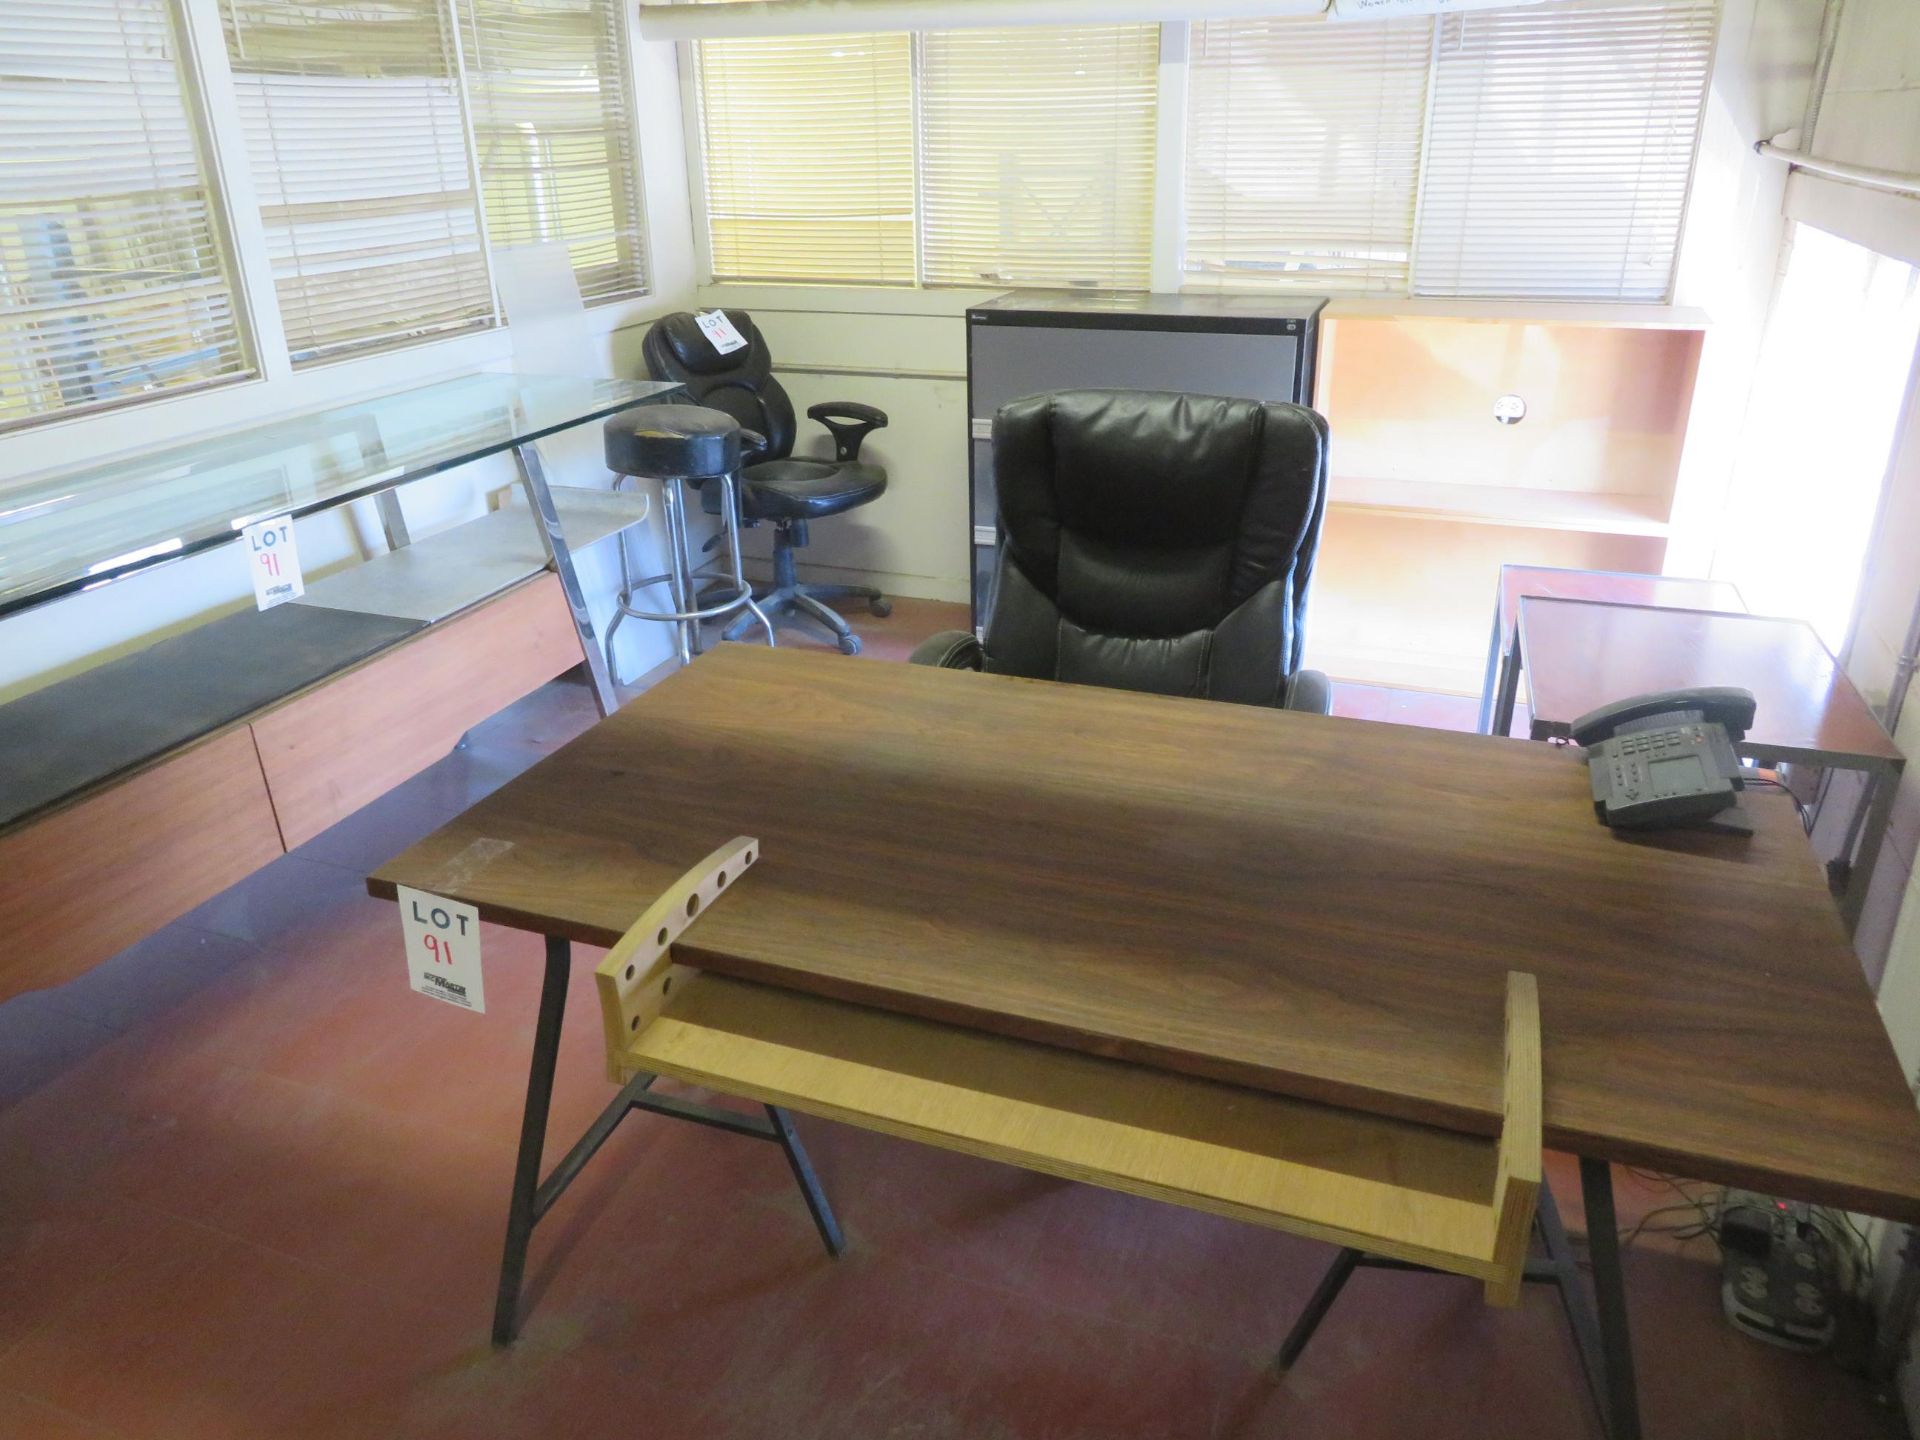 LOT including complete office with desks, filing cabinet, chairs, etc. - Image 2 of 4